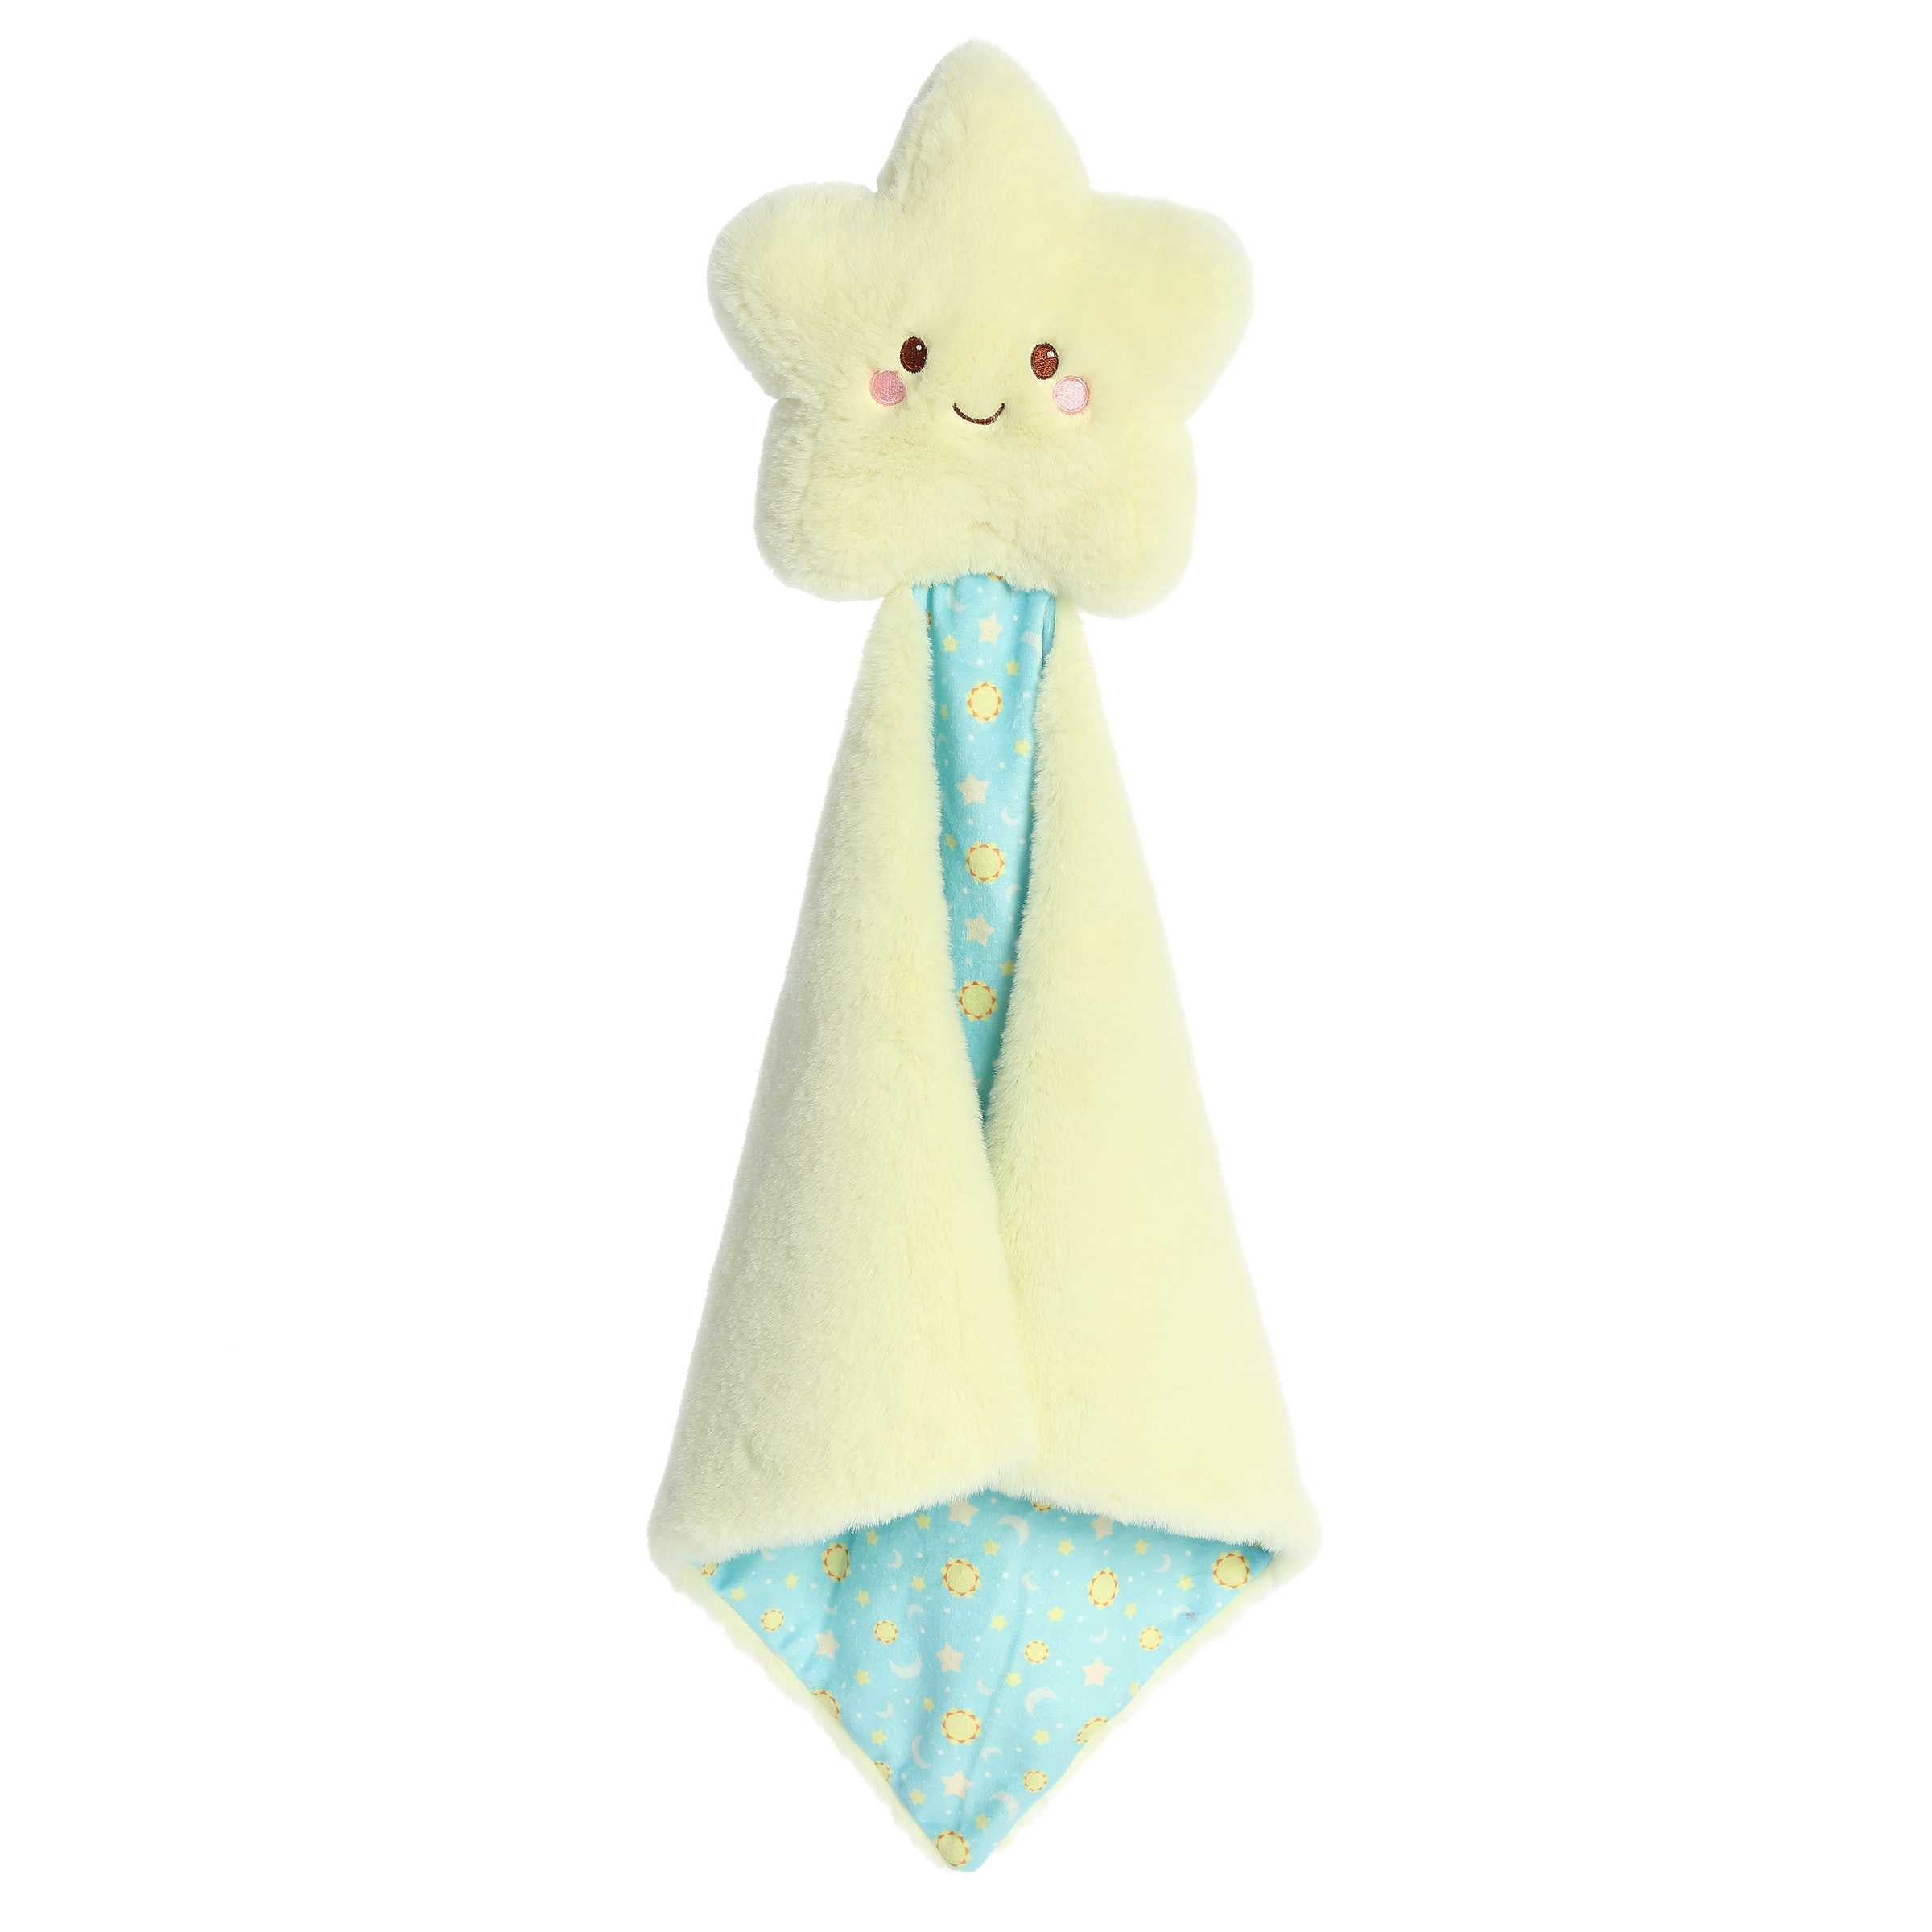 Cuddly yellow Star plush with smiling face and an attached square shaped baby blanket with yellow fur and space design.